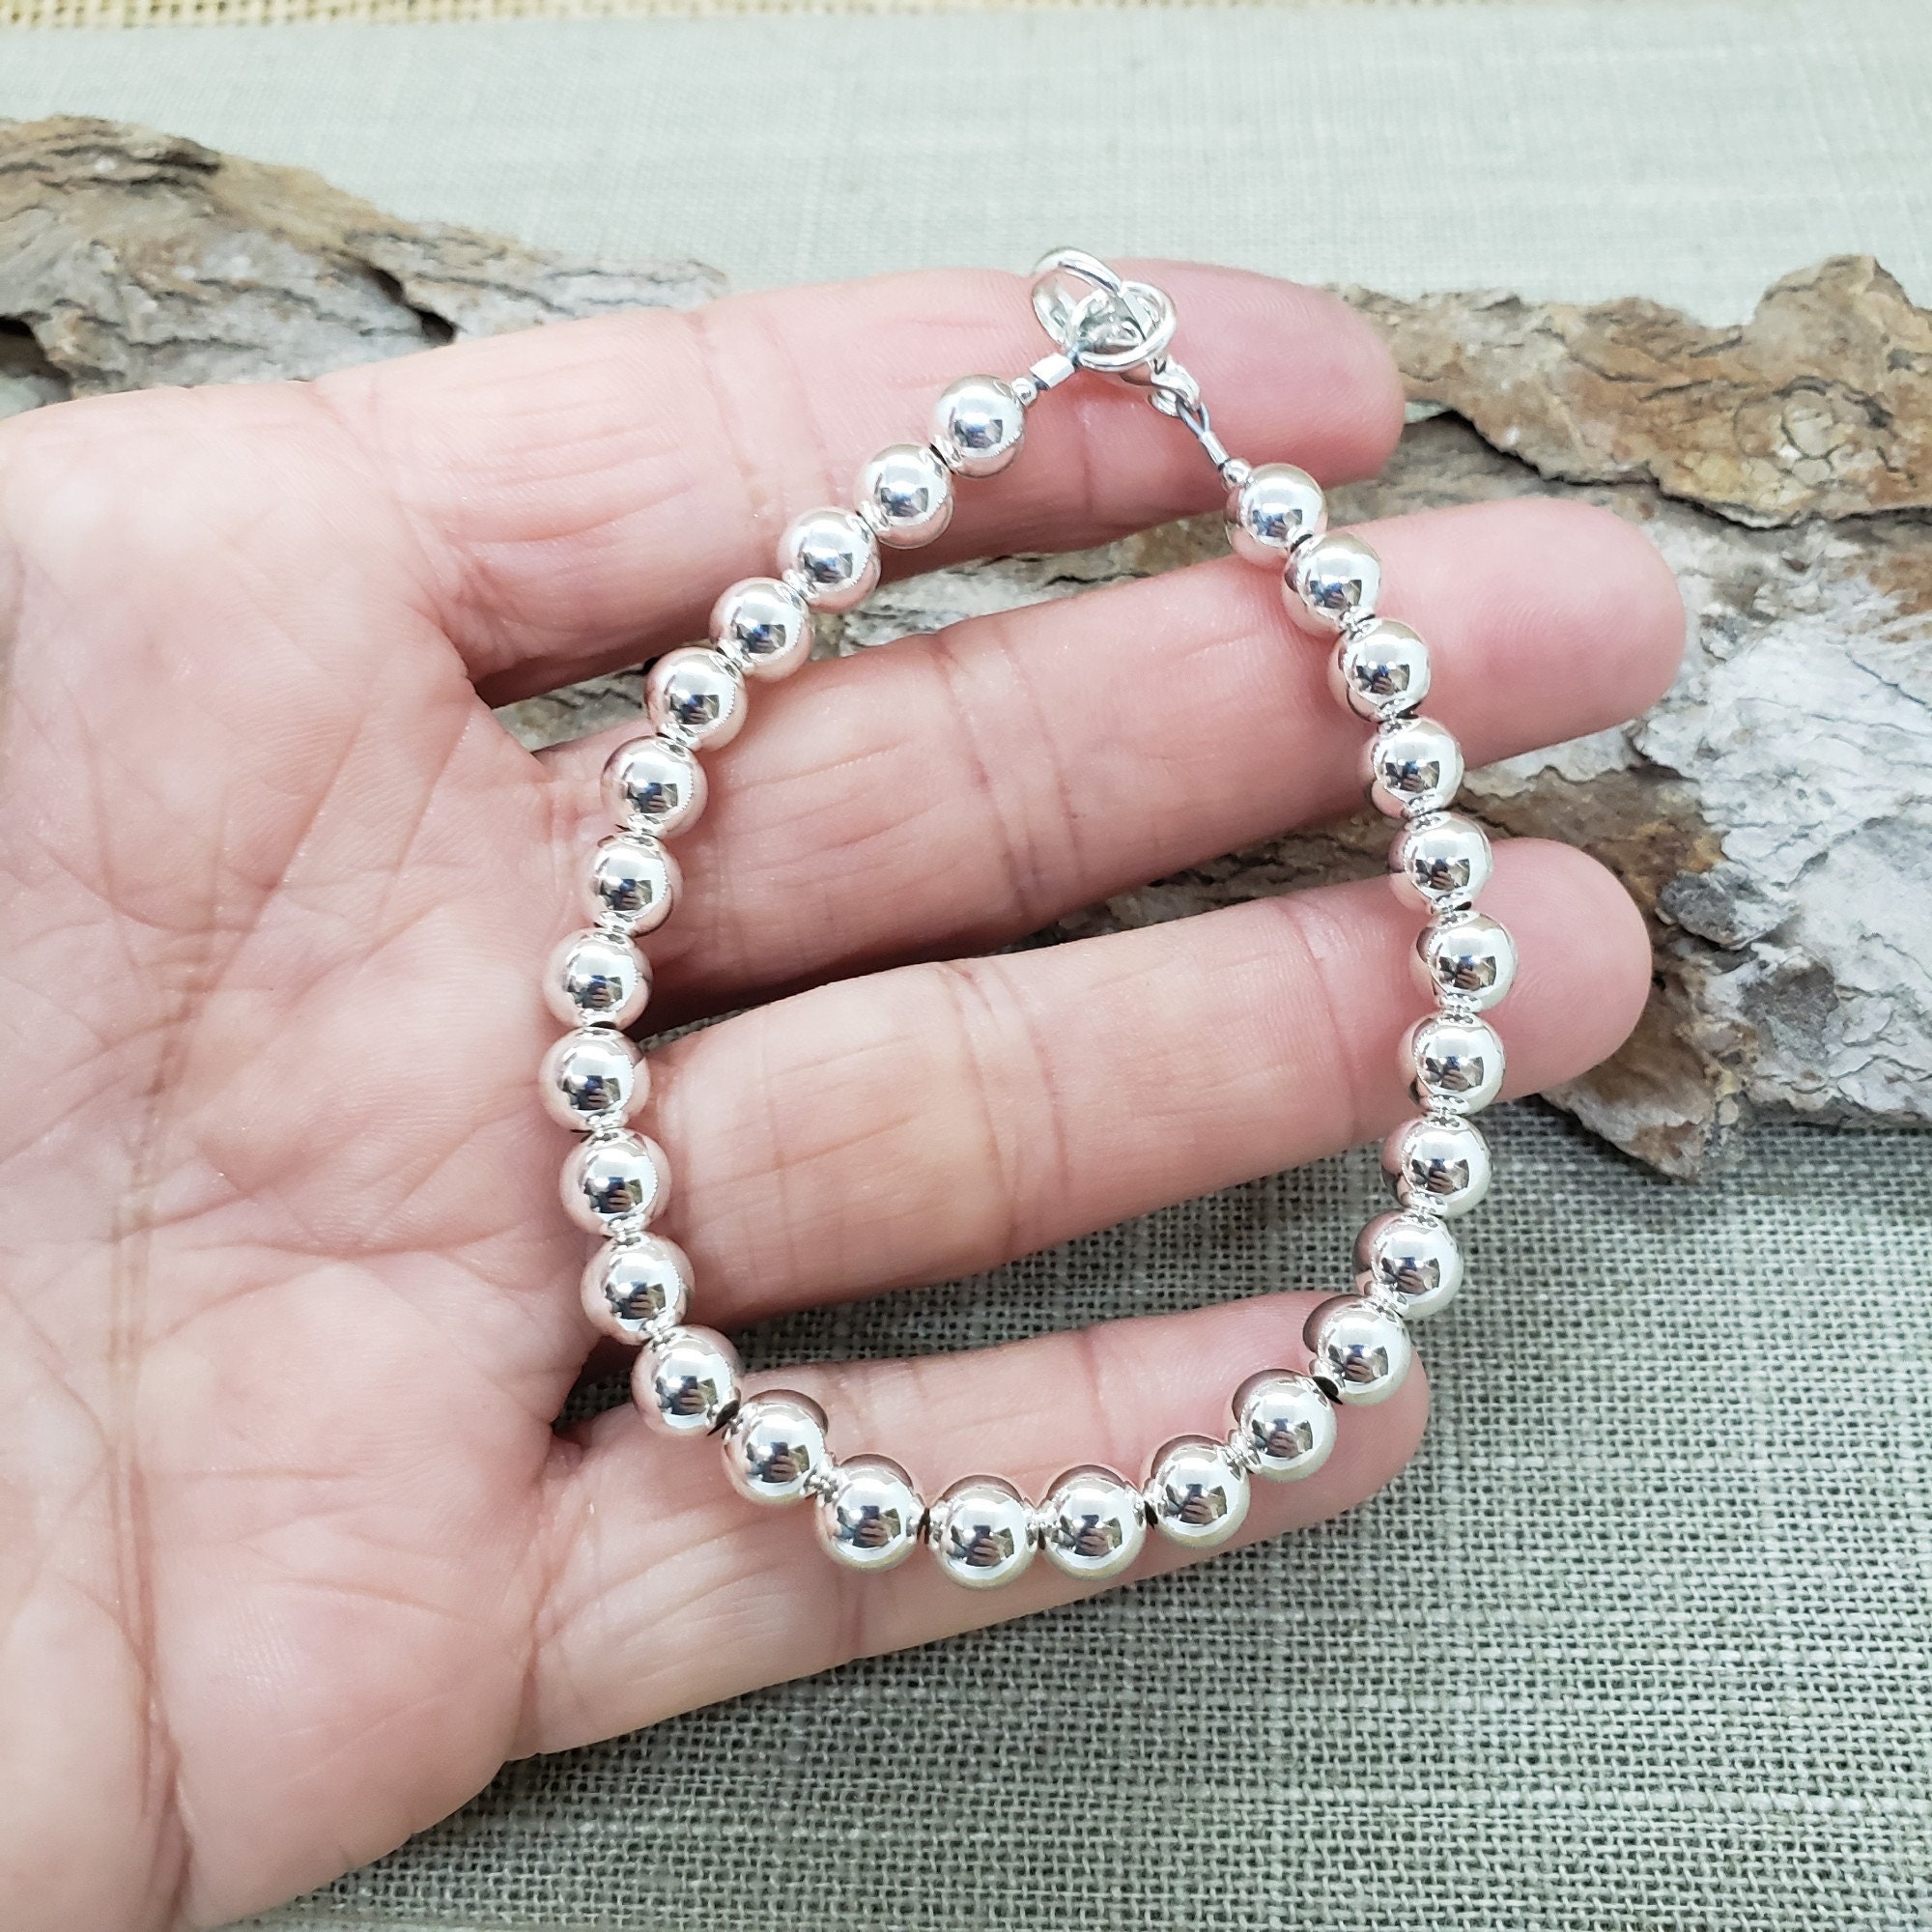 Kindness Adult Bracelet (5mm Beads) 6.5 Inches / Sterling Silver